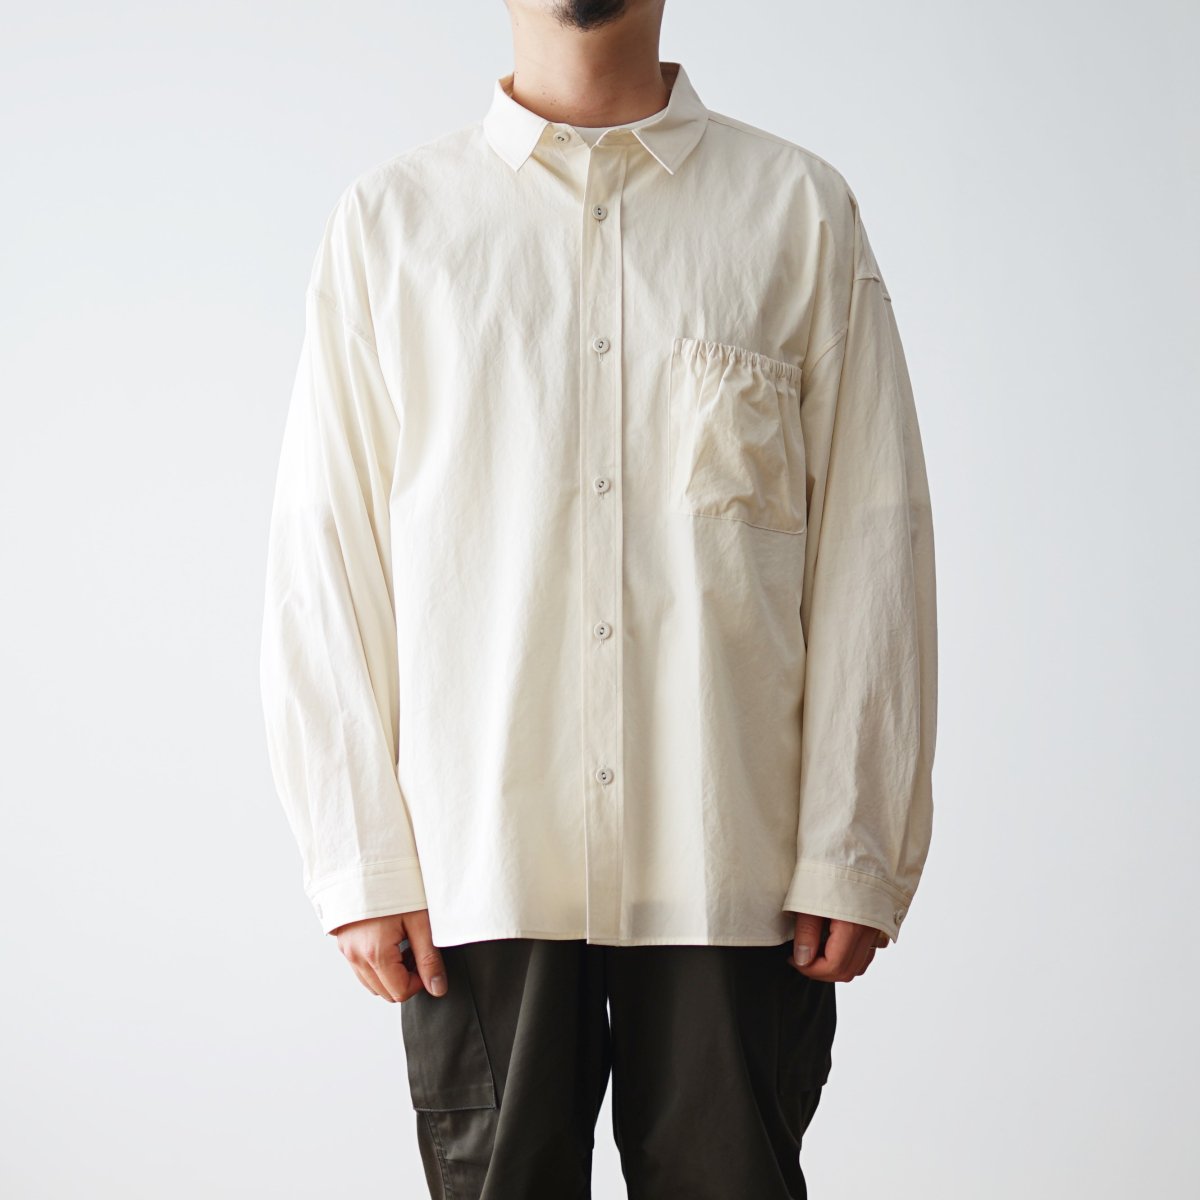 refomed リフォメッド】 WRIST PATCH WIDE SHIRT 